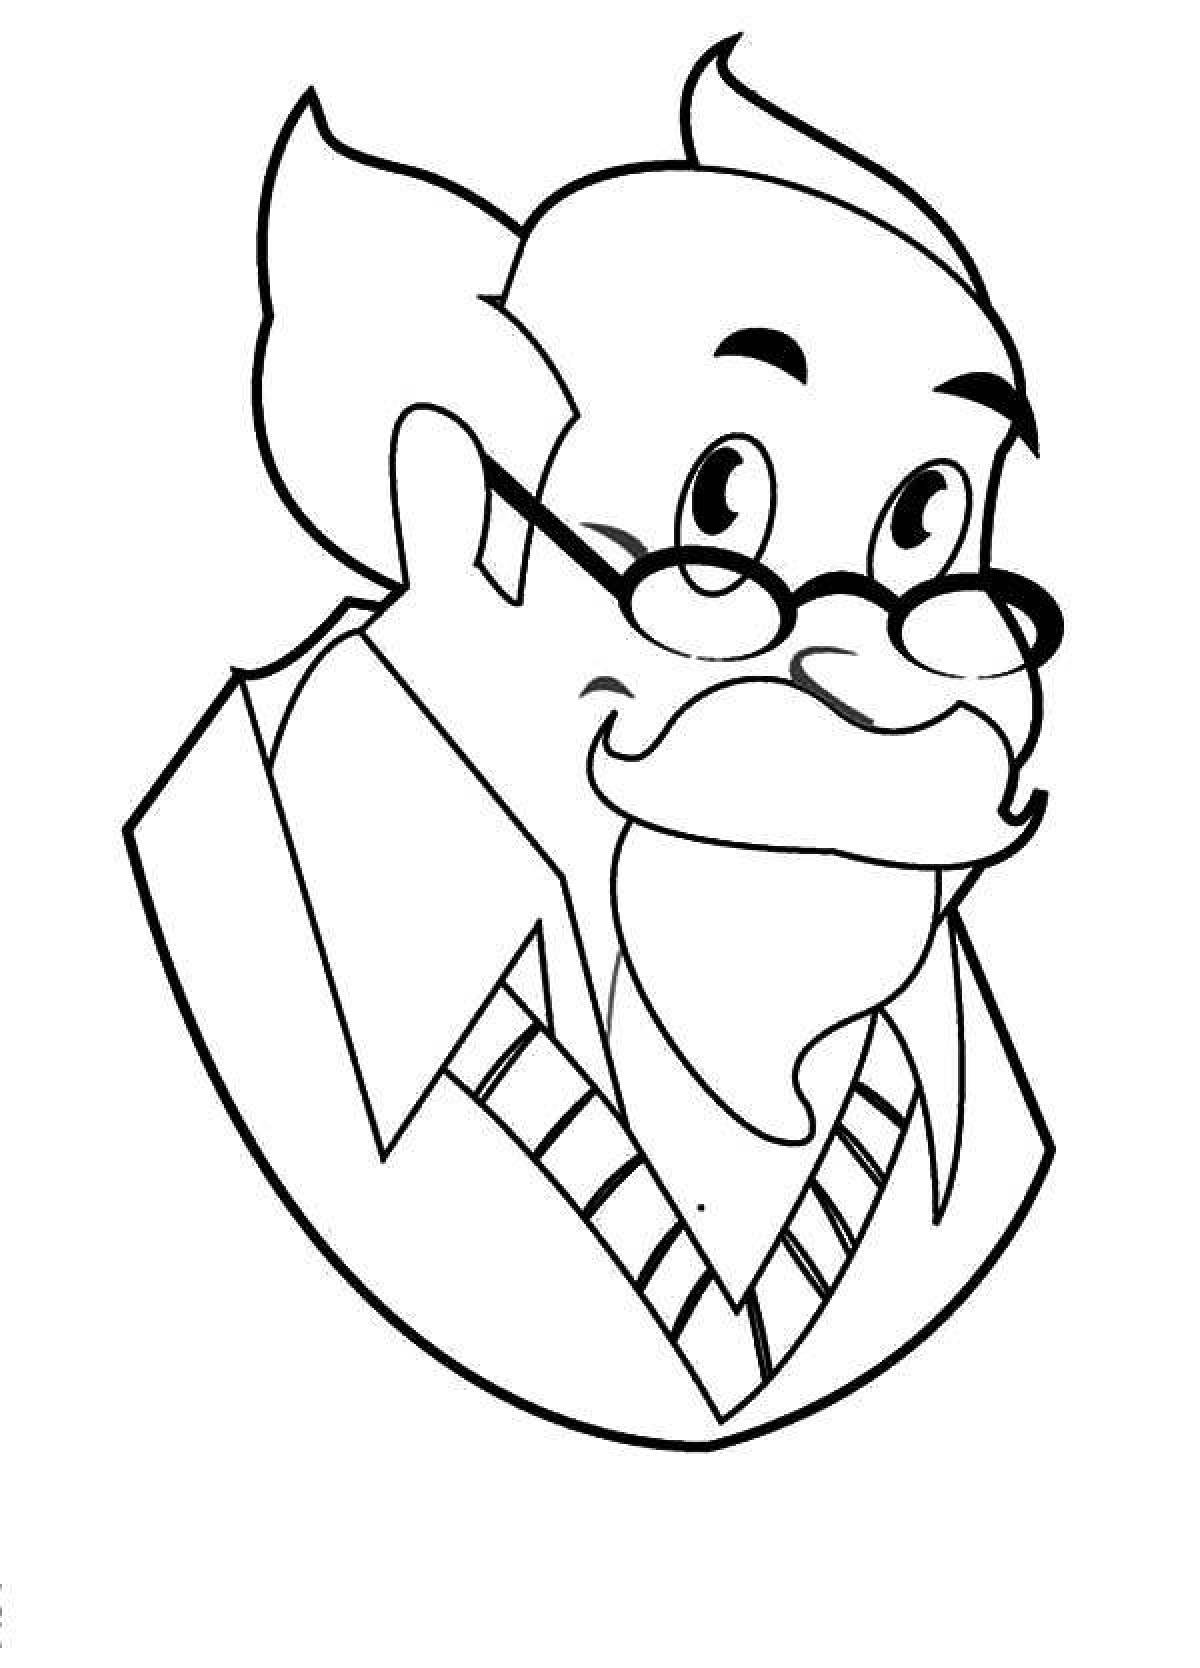 Coloring page of the outgoing grandfather